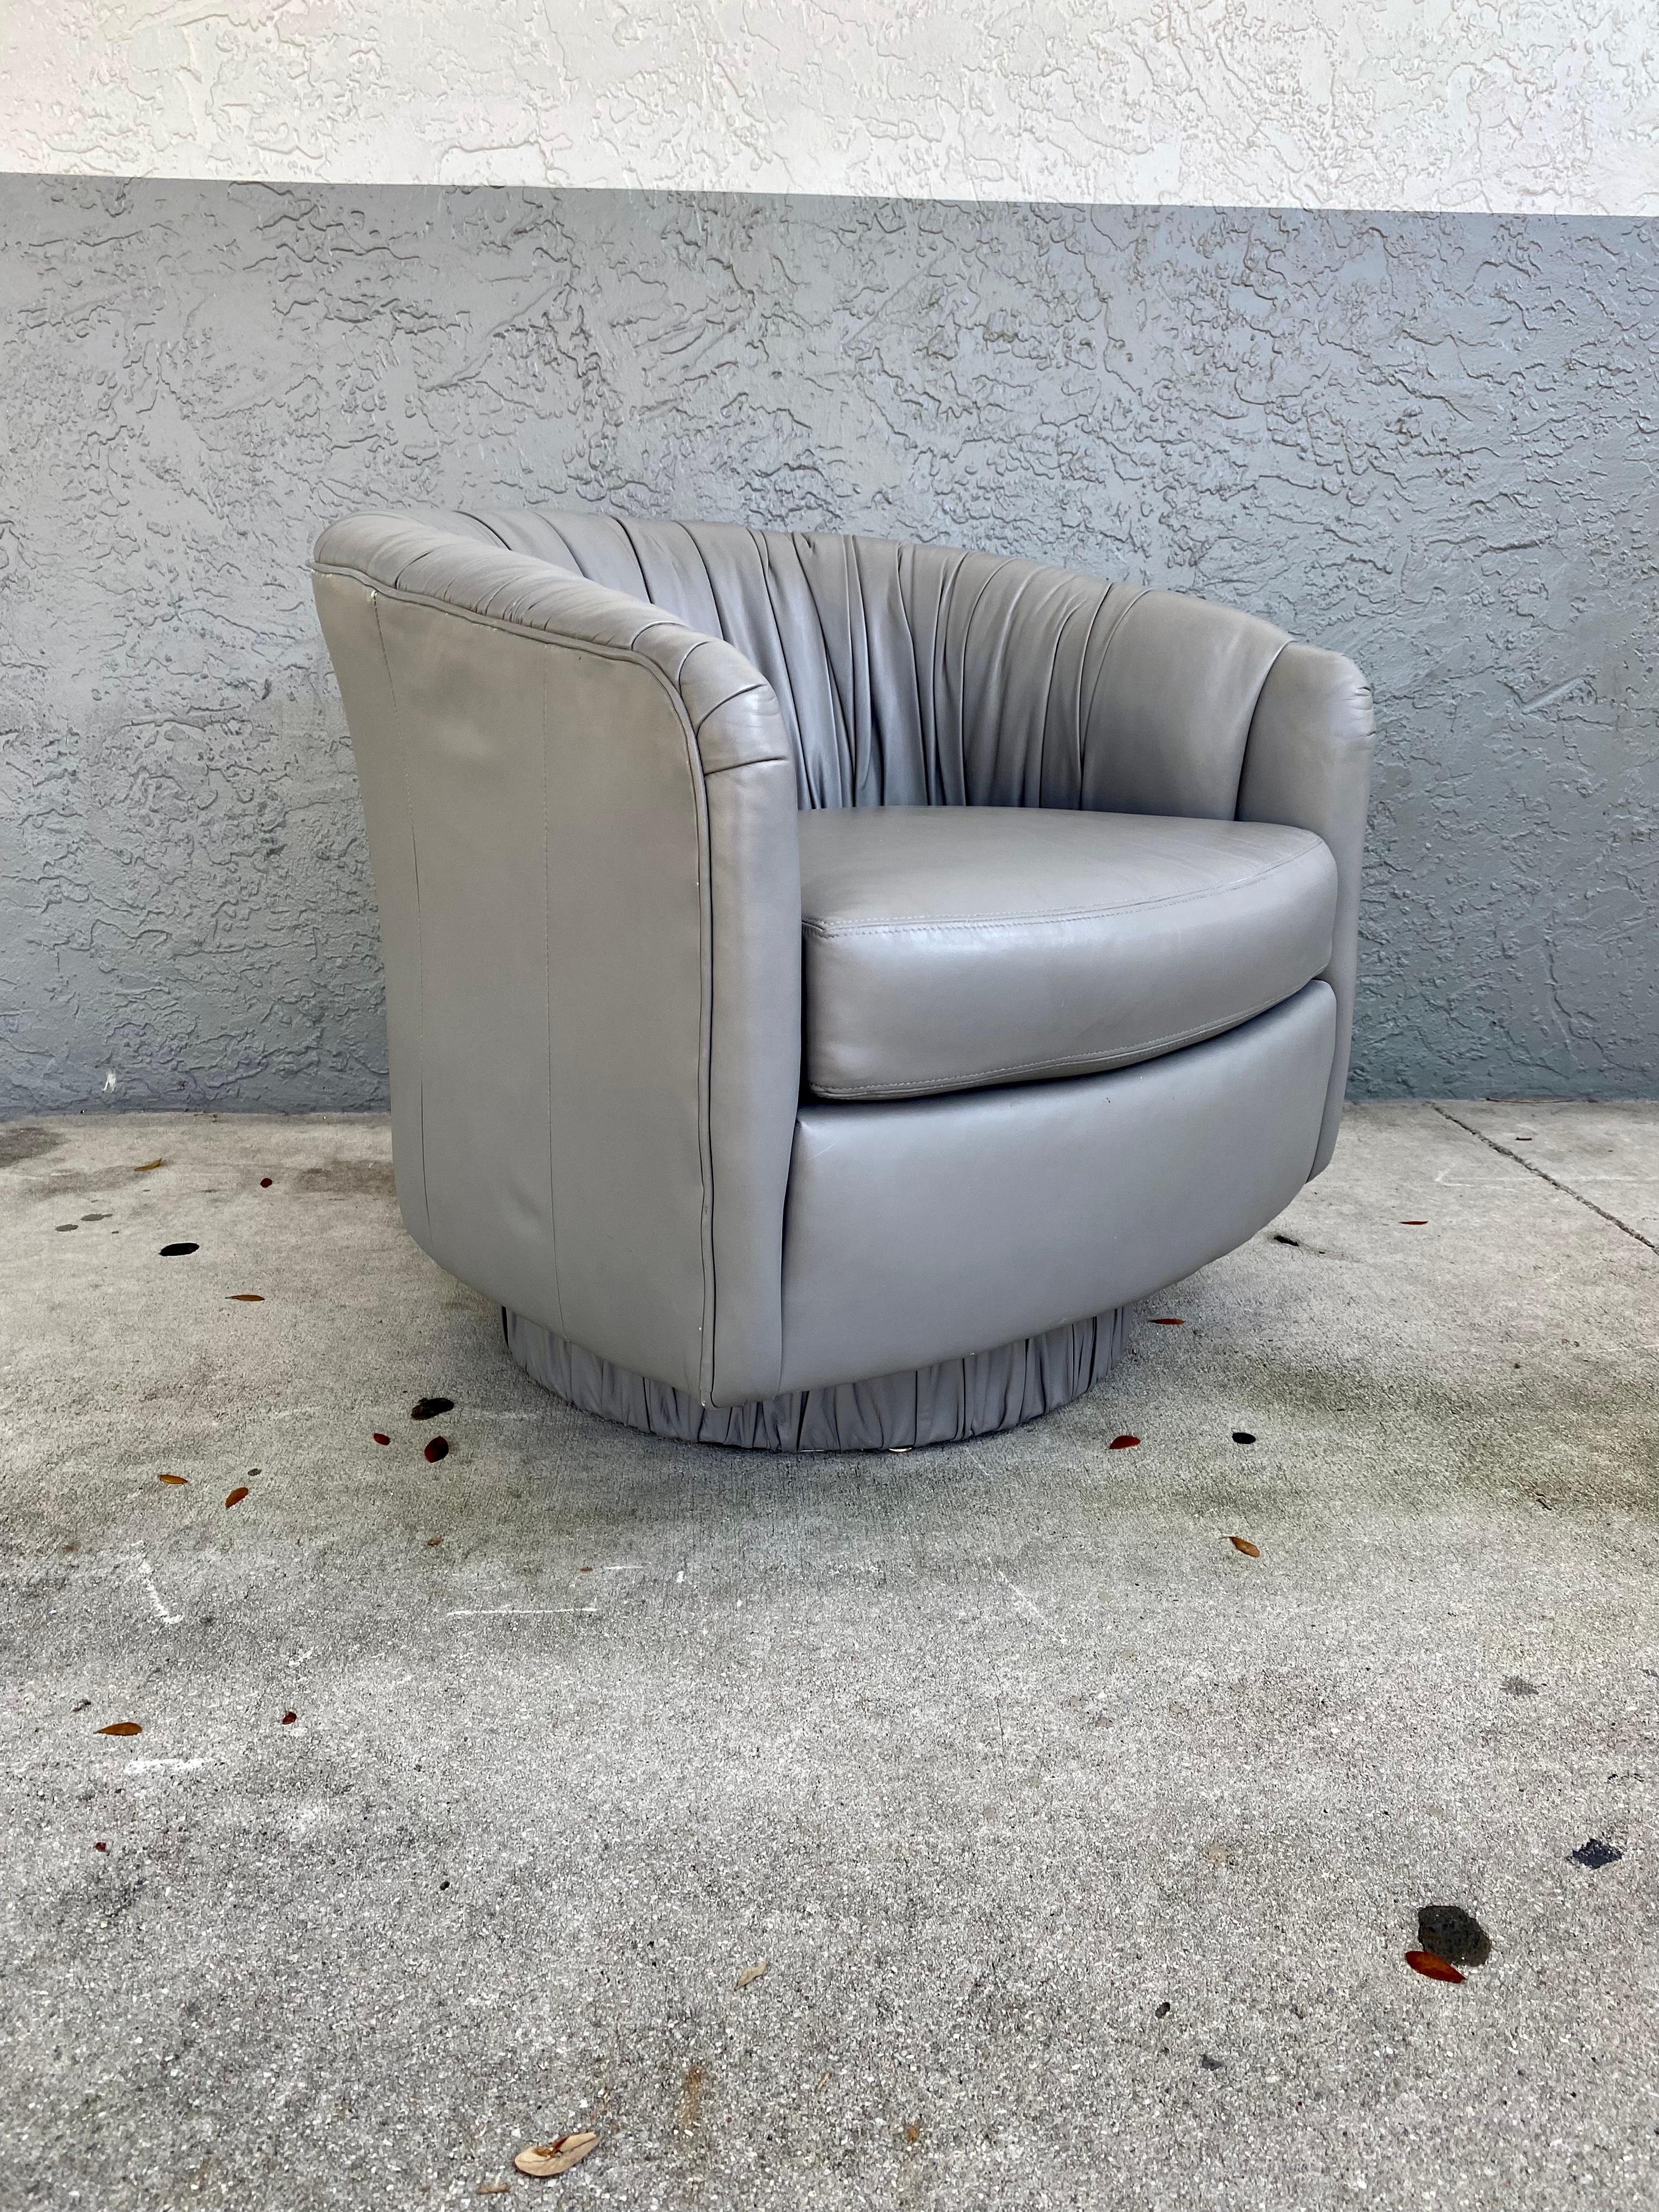 On offer on this occasion is one of the most stunning, swivel chair you could hope to find. This is an ultra-rare opportunity to acquire what is, unequivocally, the best of the best, it being a most spectacular and beautifully-presented chair.